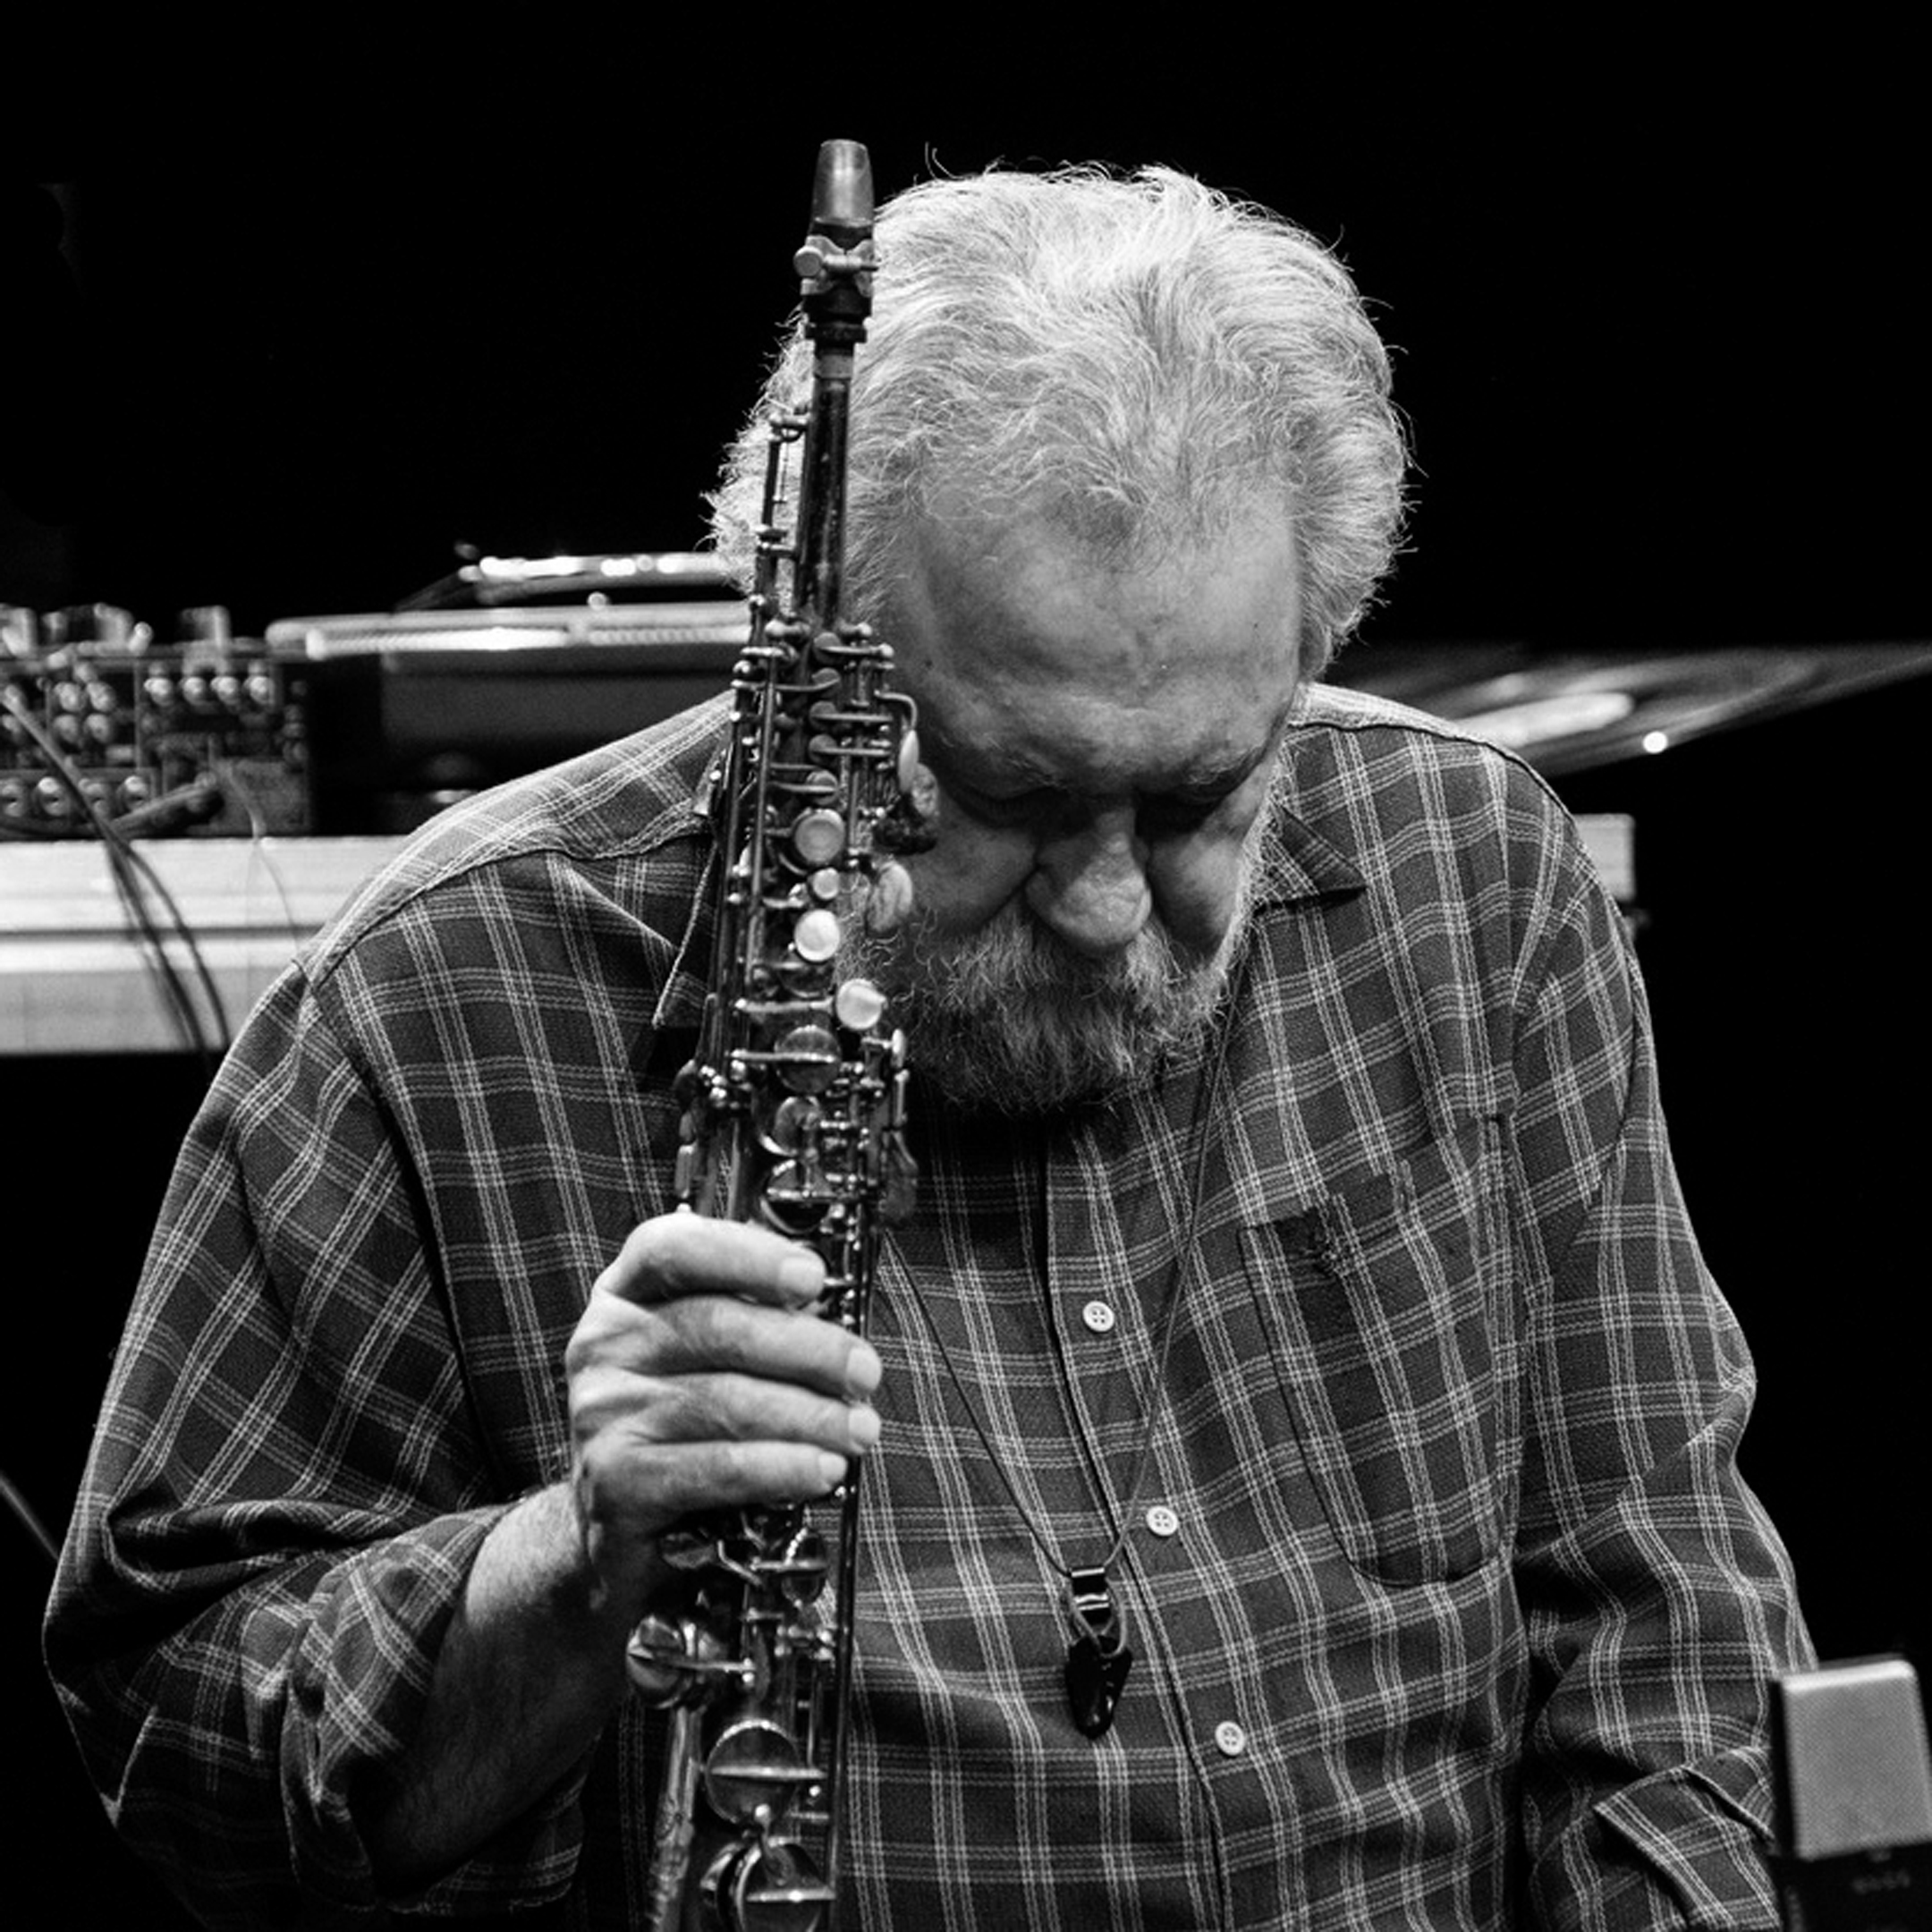 Photos Intakt CD 409 EVAN PARKER MATTHEW WRIGHT TRANCE MAP+
PETER EVANS AND MARK NAUSEEF
ETCHING THE ETHER